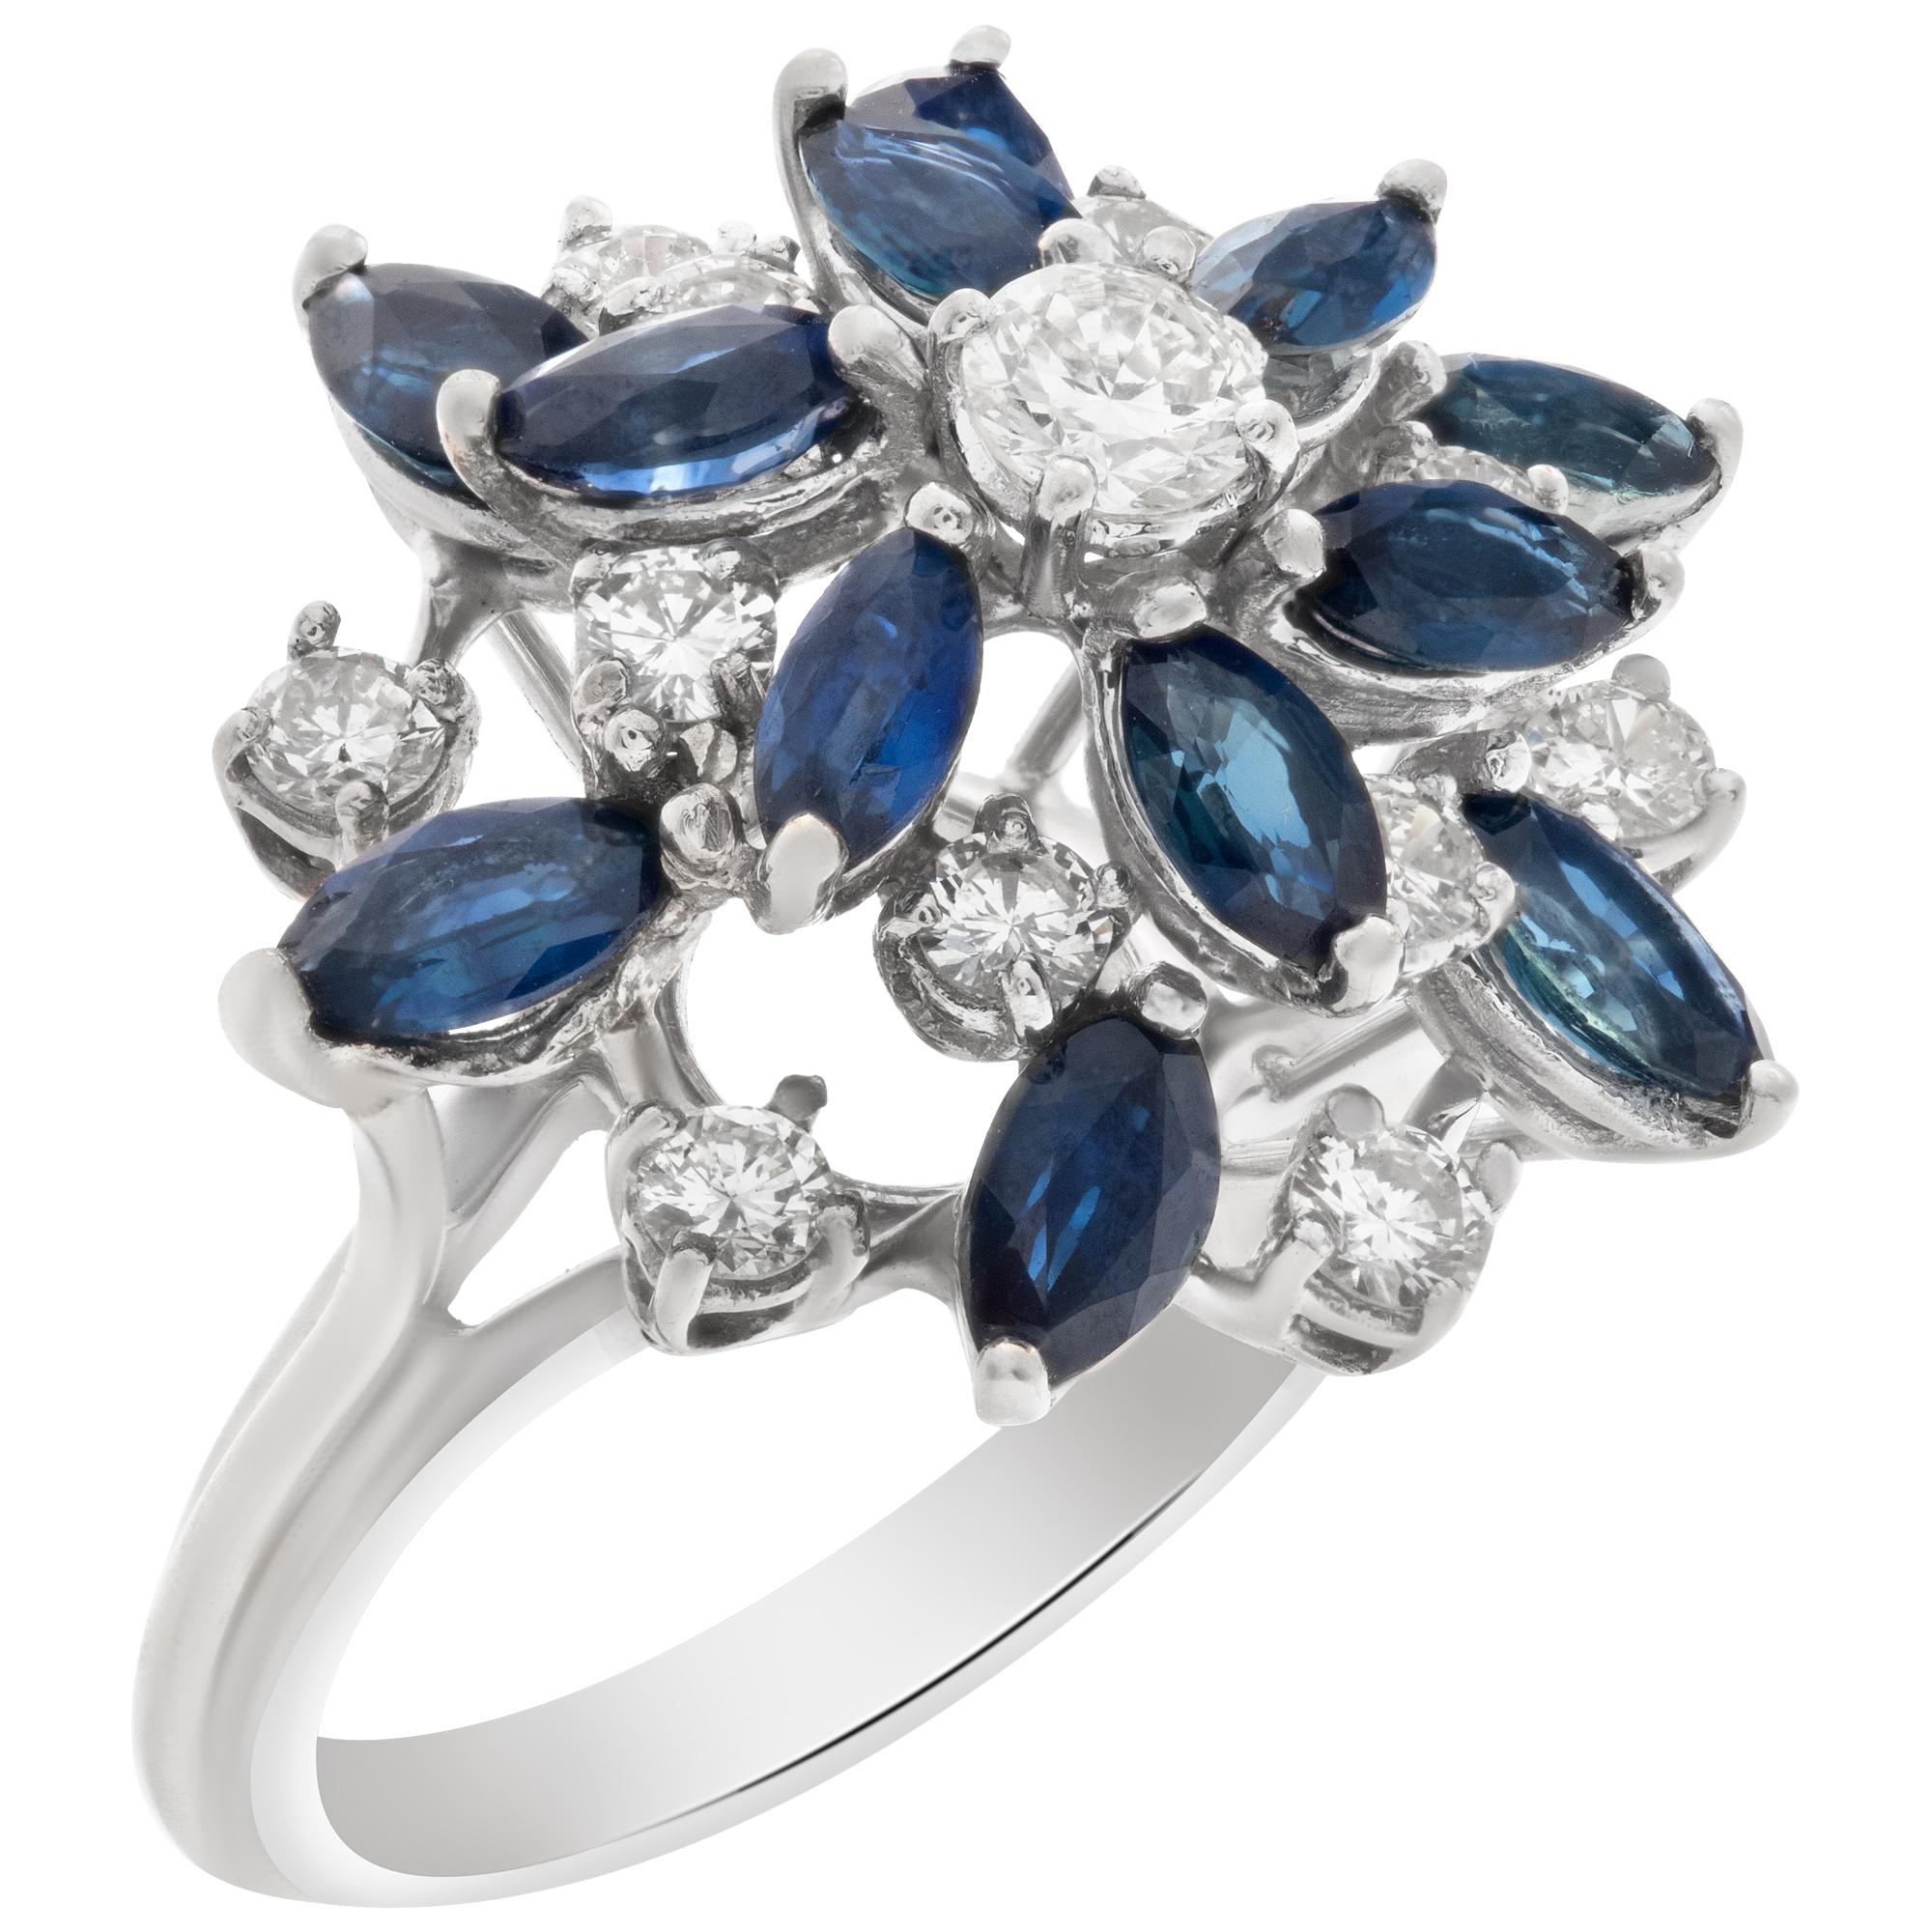 Diamond and Sapphire Ring in 14k White Gold In Excellent Condition For Sale In Surfside, FL